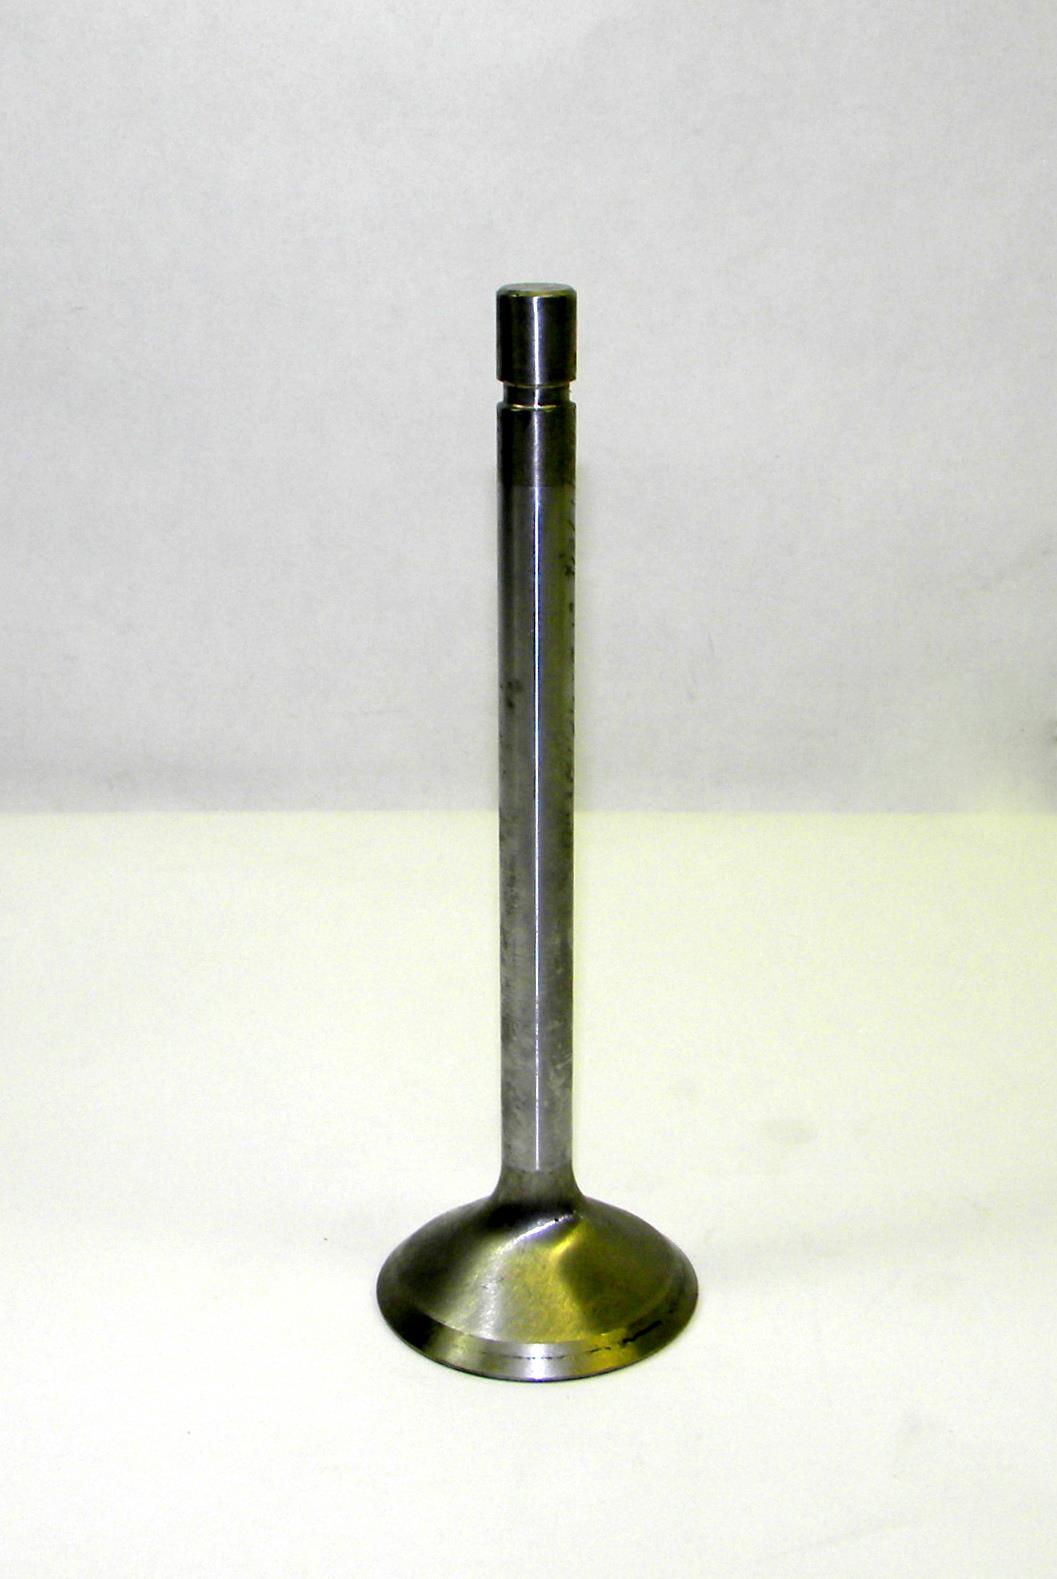 M35-503 | 2815-00-116-8335 Intake Poppet Valve for M35A2 Series with Multifuel Engine. NOS.  (4).JPG